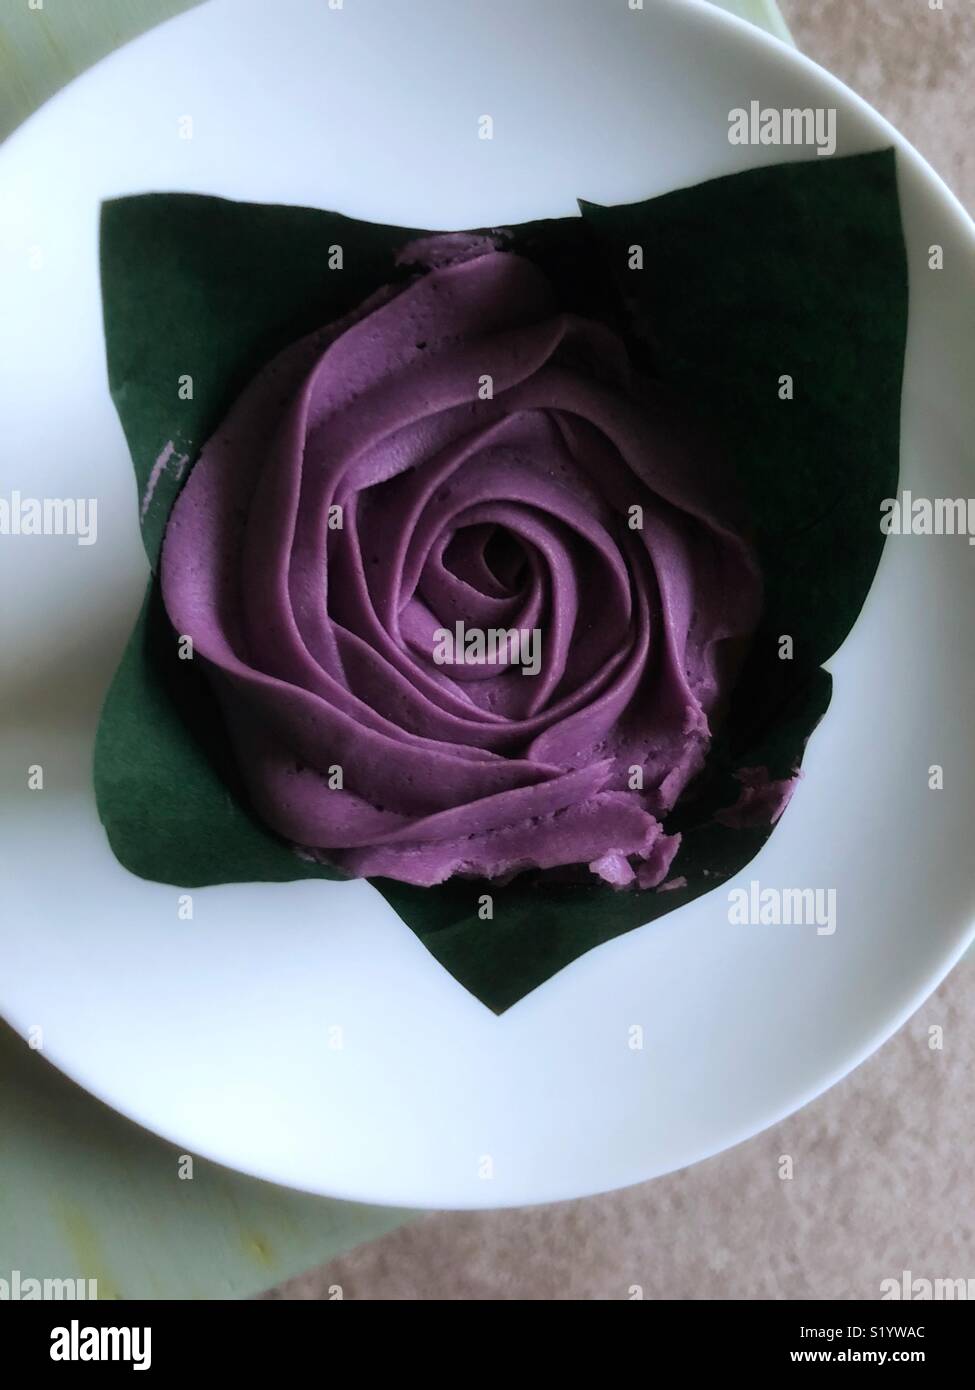 Single piped icing flower on top of a cup cake, wrapped in greaseproof paper to represent leaves sitting on a round white plate. Food art at it’s best. Stock Photo